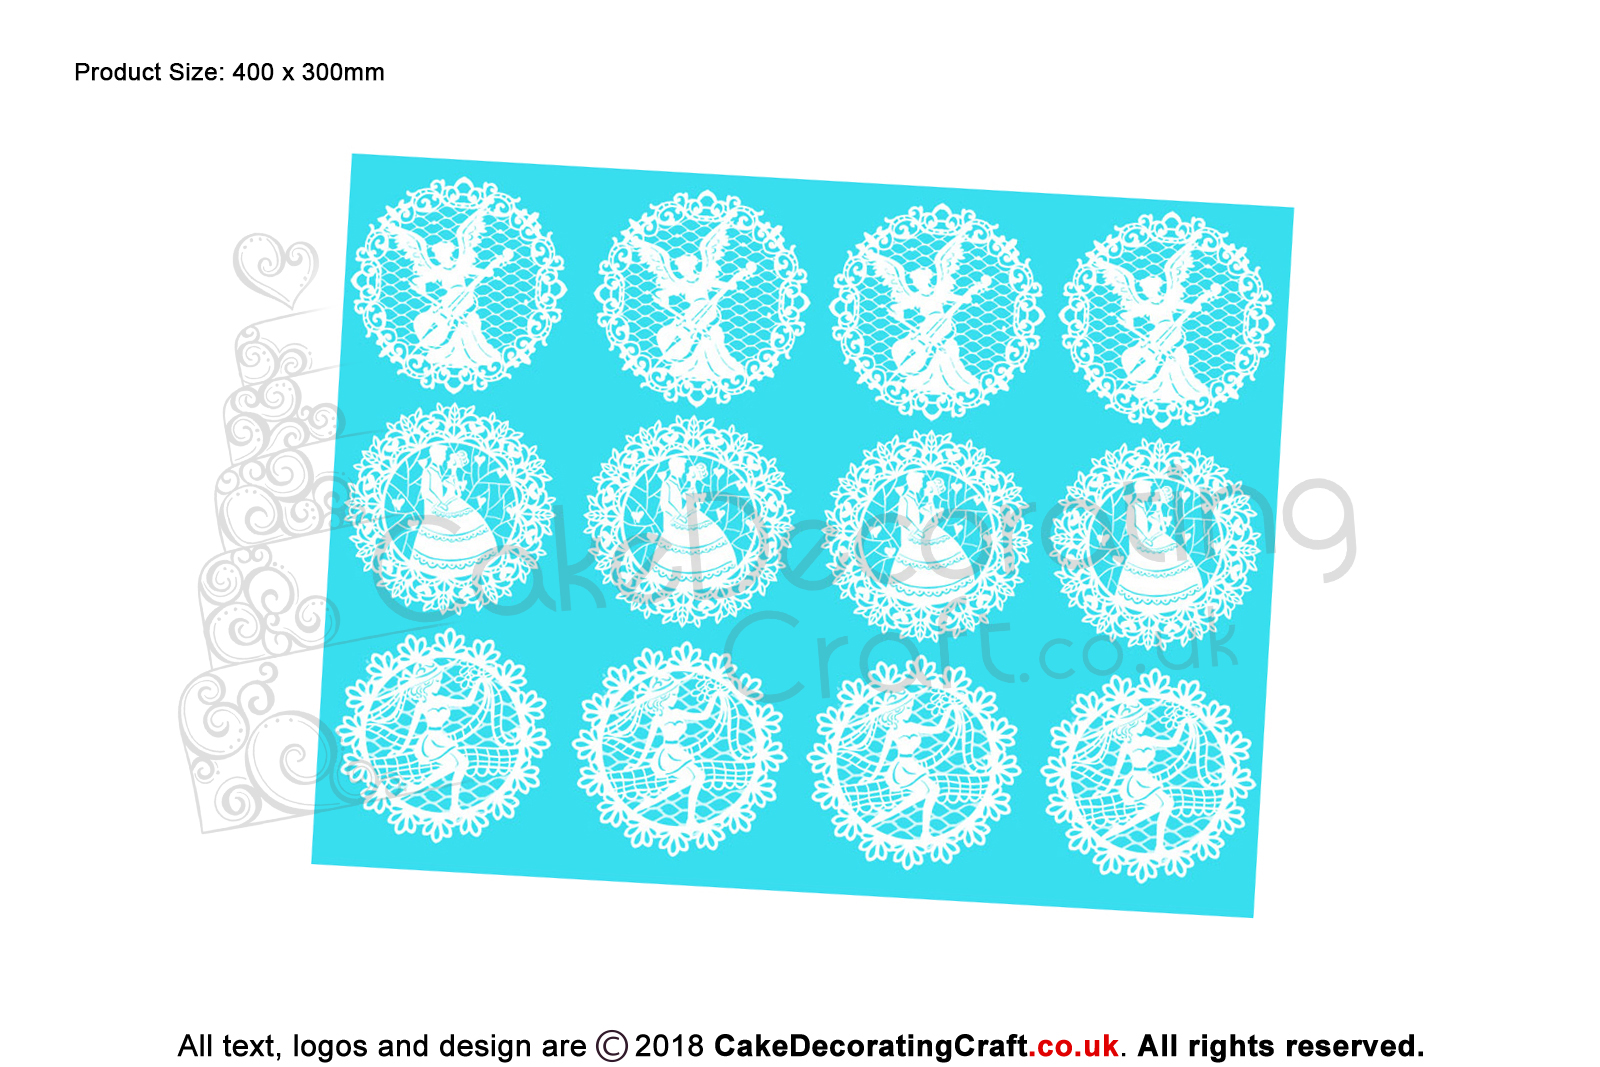 Angels | Cake Lace Mats for Edible Cake Lace Mixes and Premixes | Cake and Cupcake Decorating Craft Tool